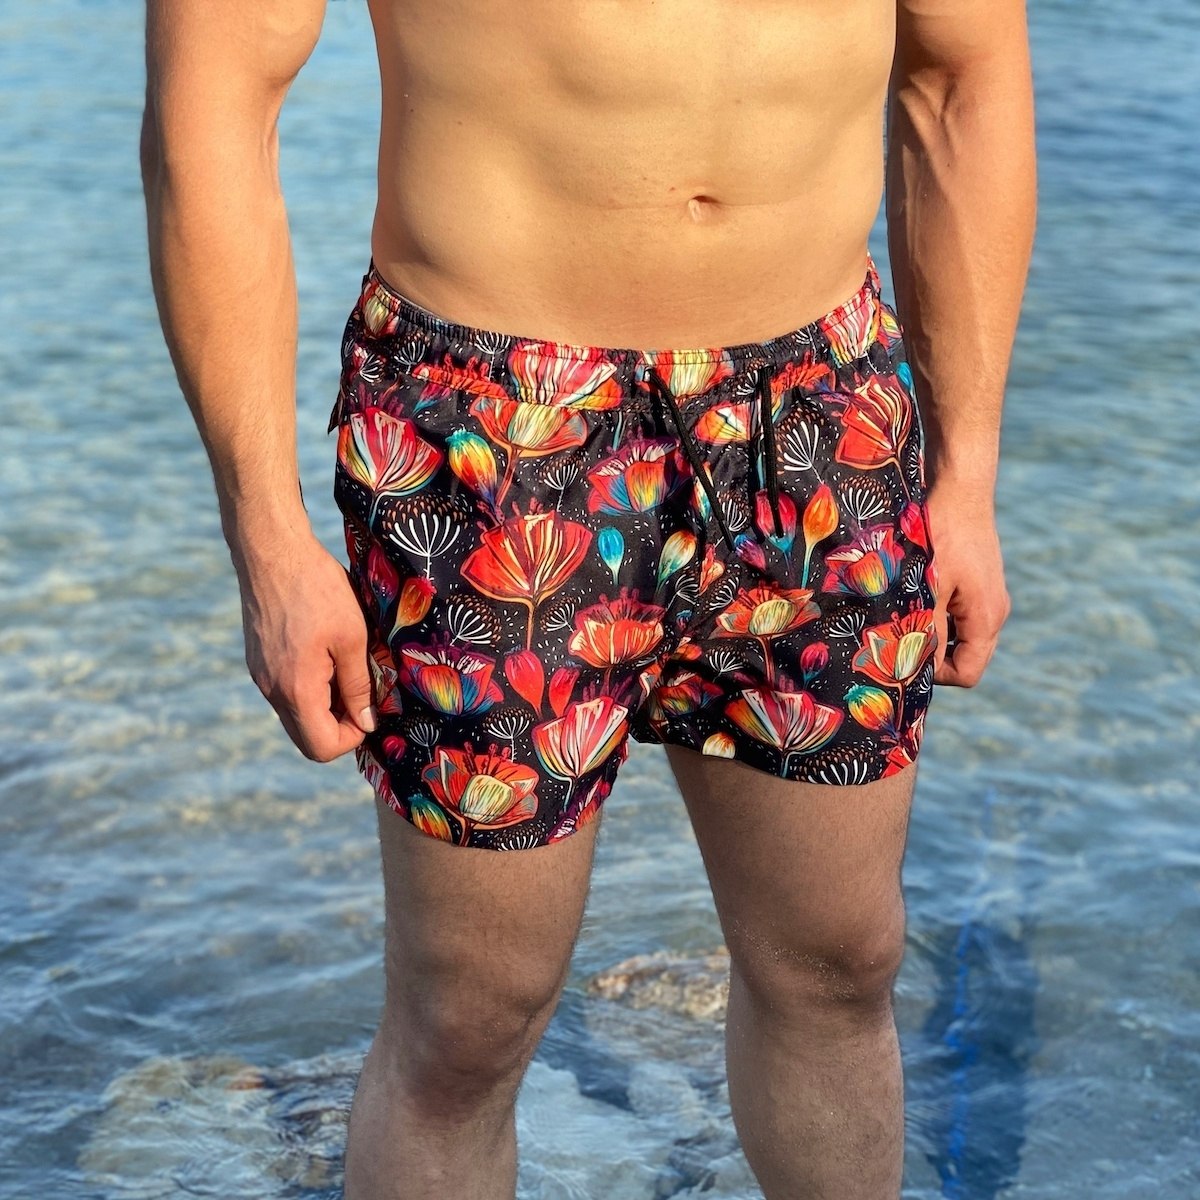 Men's Swimming Short With Floral Patterns - 2